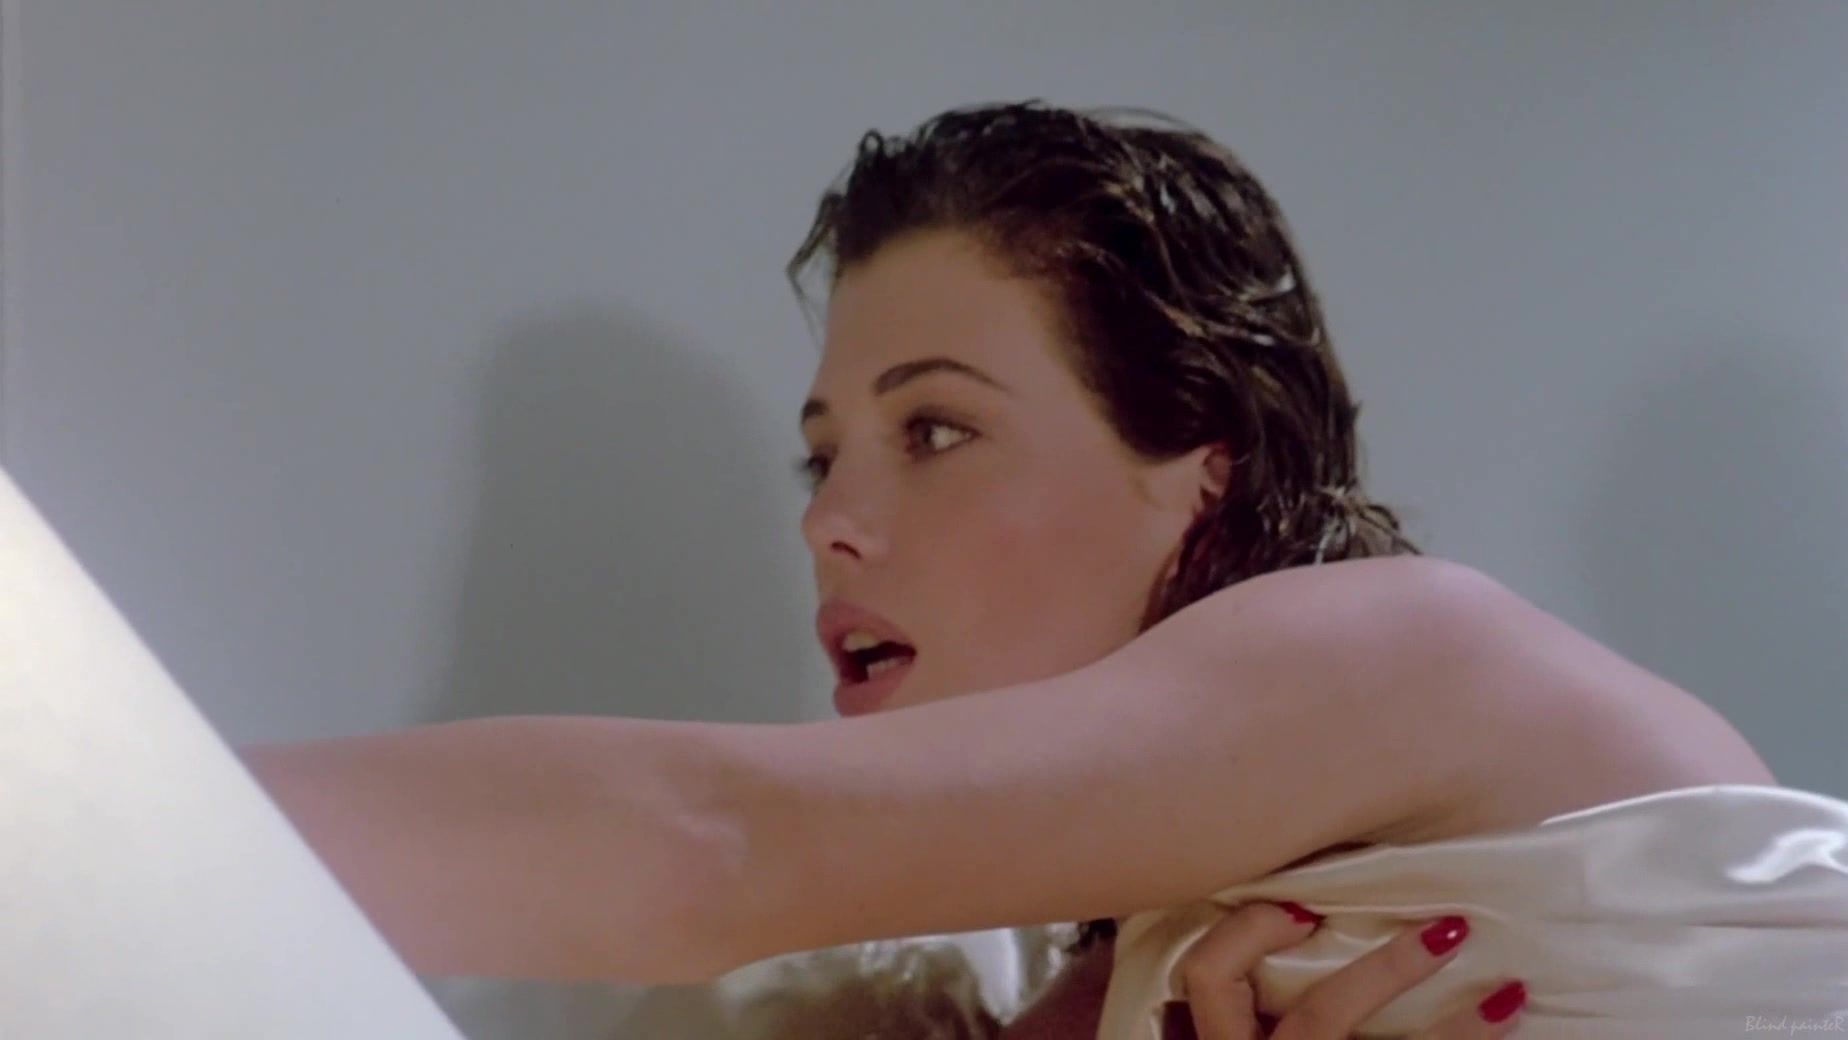 Clit Kelly LeBrock nude - The Woman in Red (1984) Francaise - 1